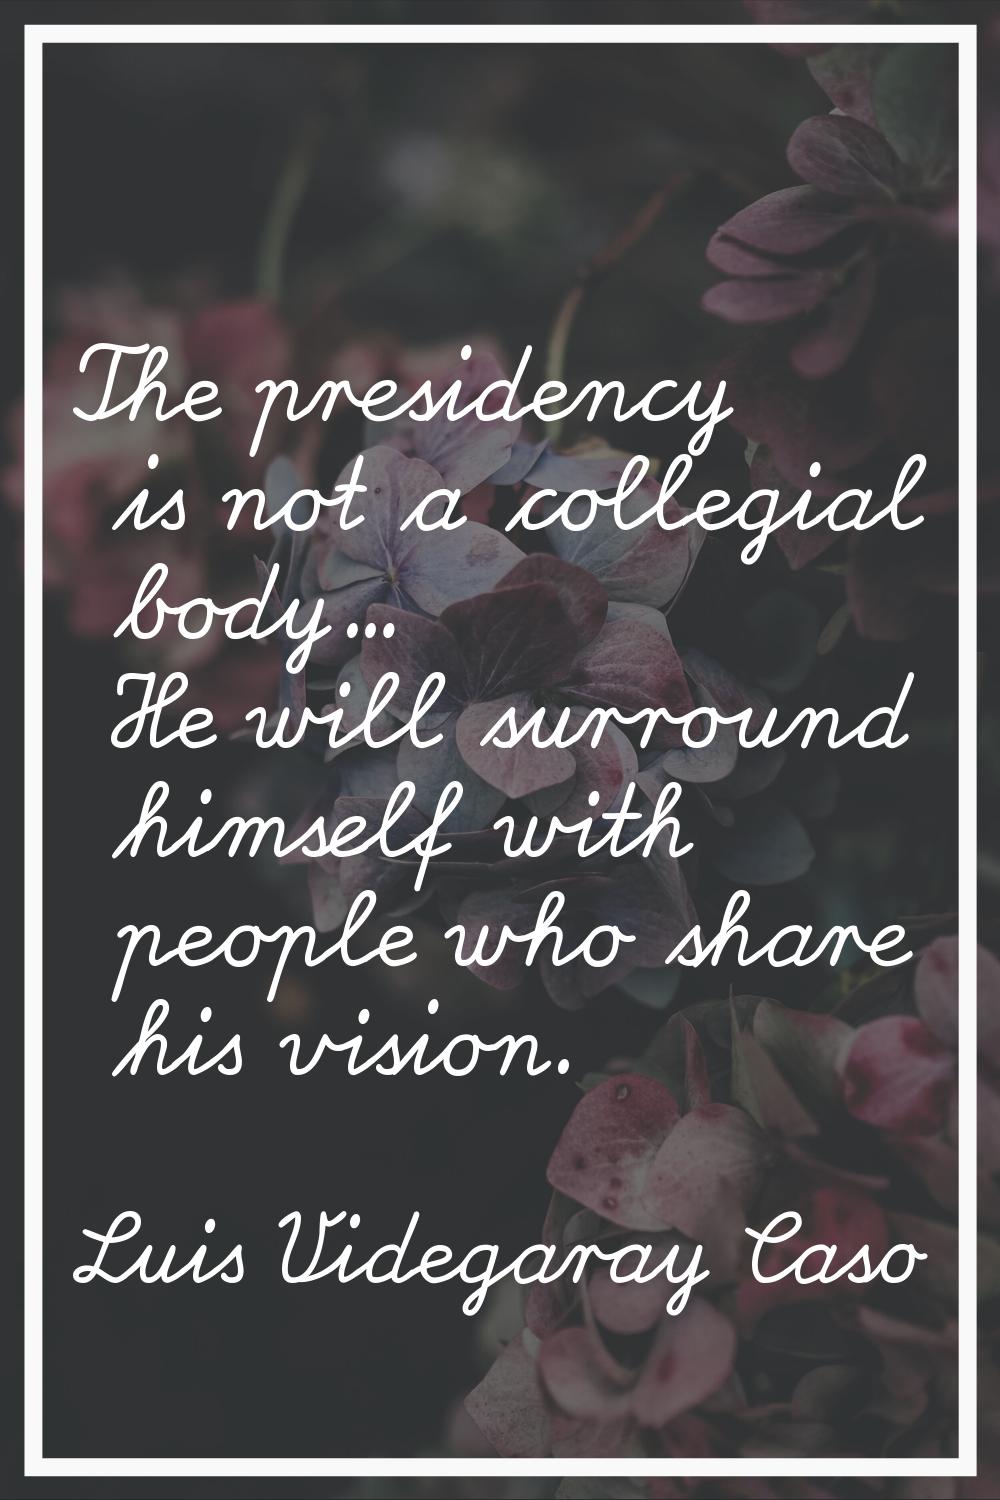 The presidency is not a collegial body... He will surround himself with people who share his vision